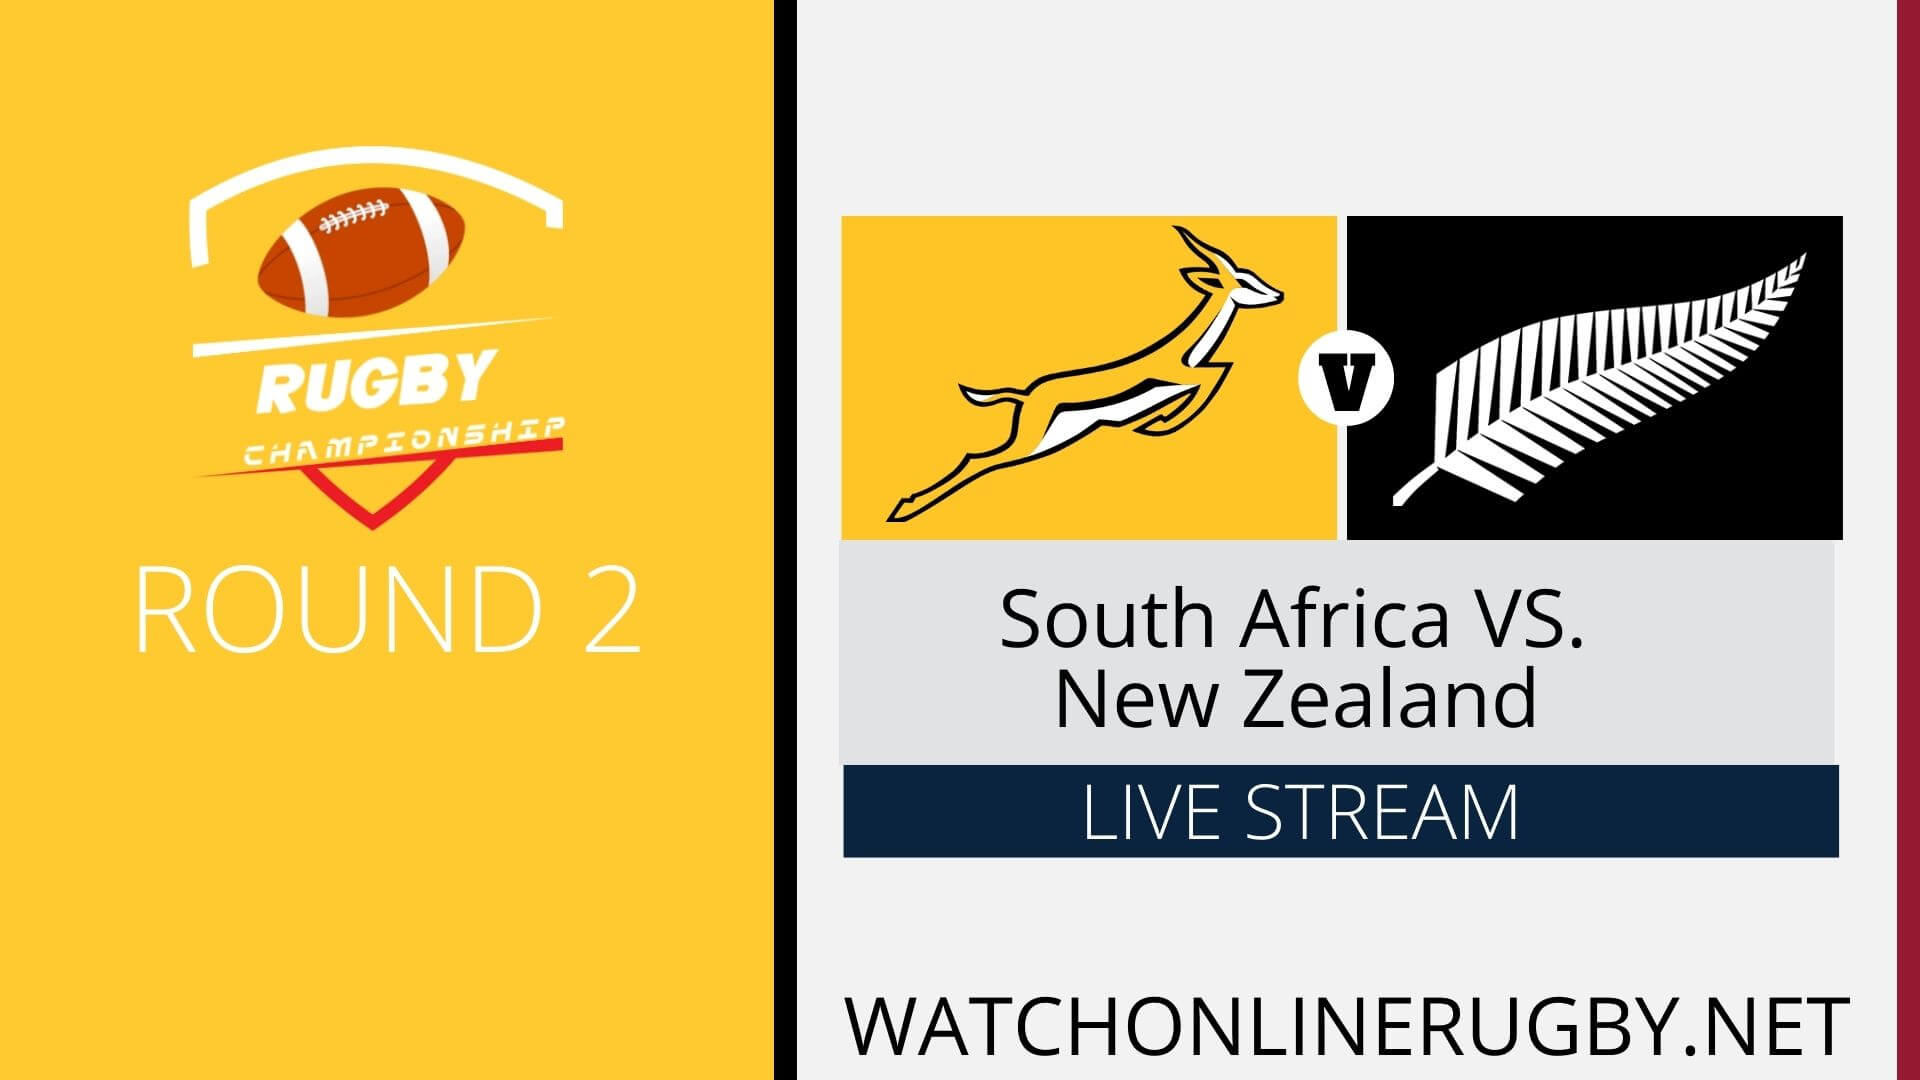 New Zealand Vs South Africa Rugby Live Online